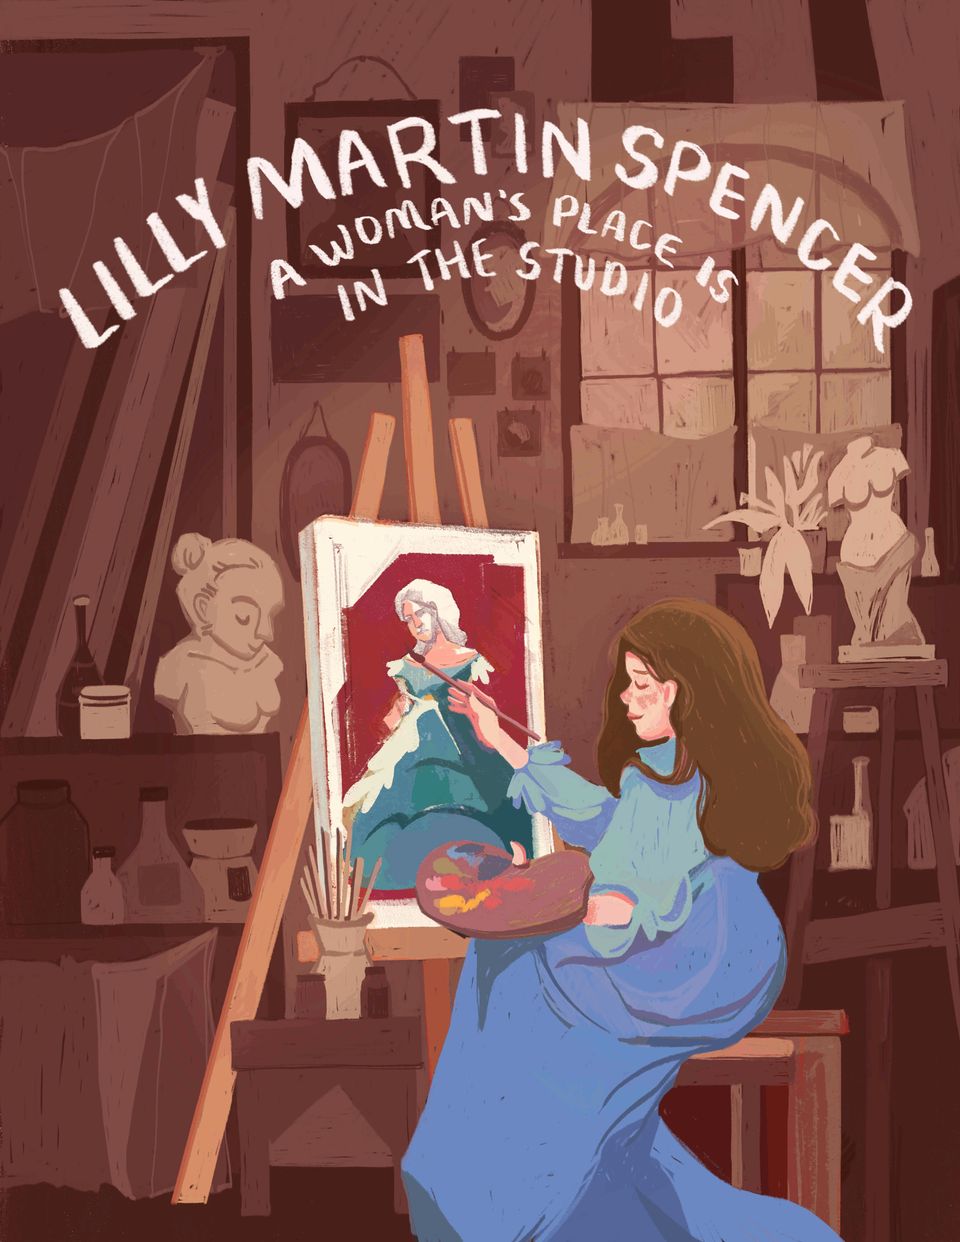 Lilly Martin Spencer sits in front of an easel, painting in an artist studio. Text reads: "Lilly Martin Spencer: A Woman’s Place is in the Studio."